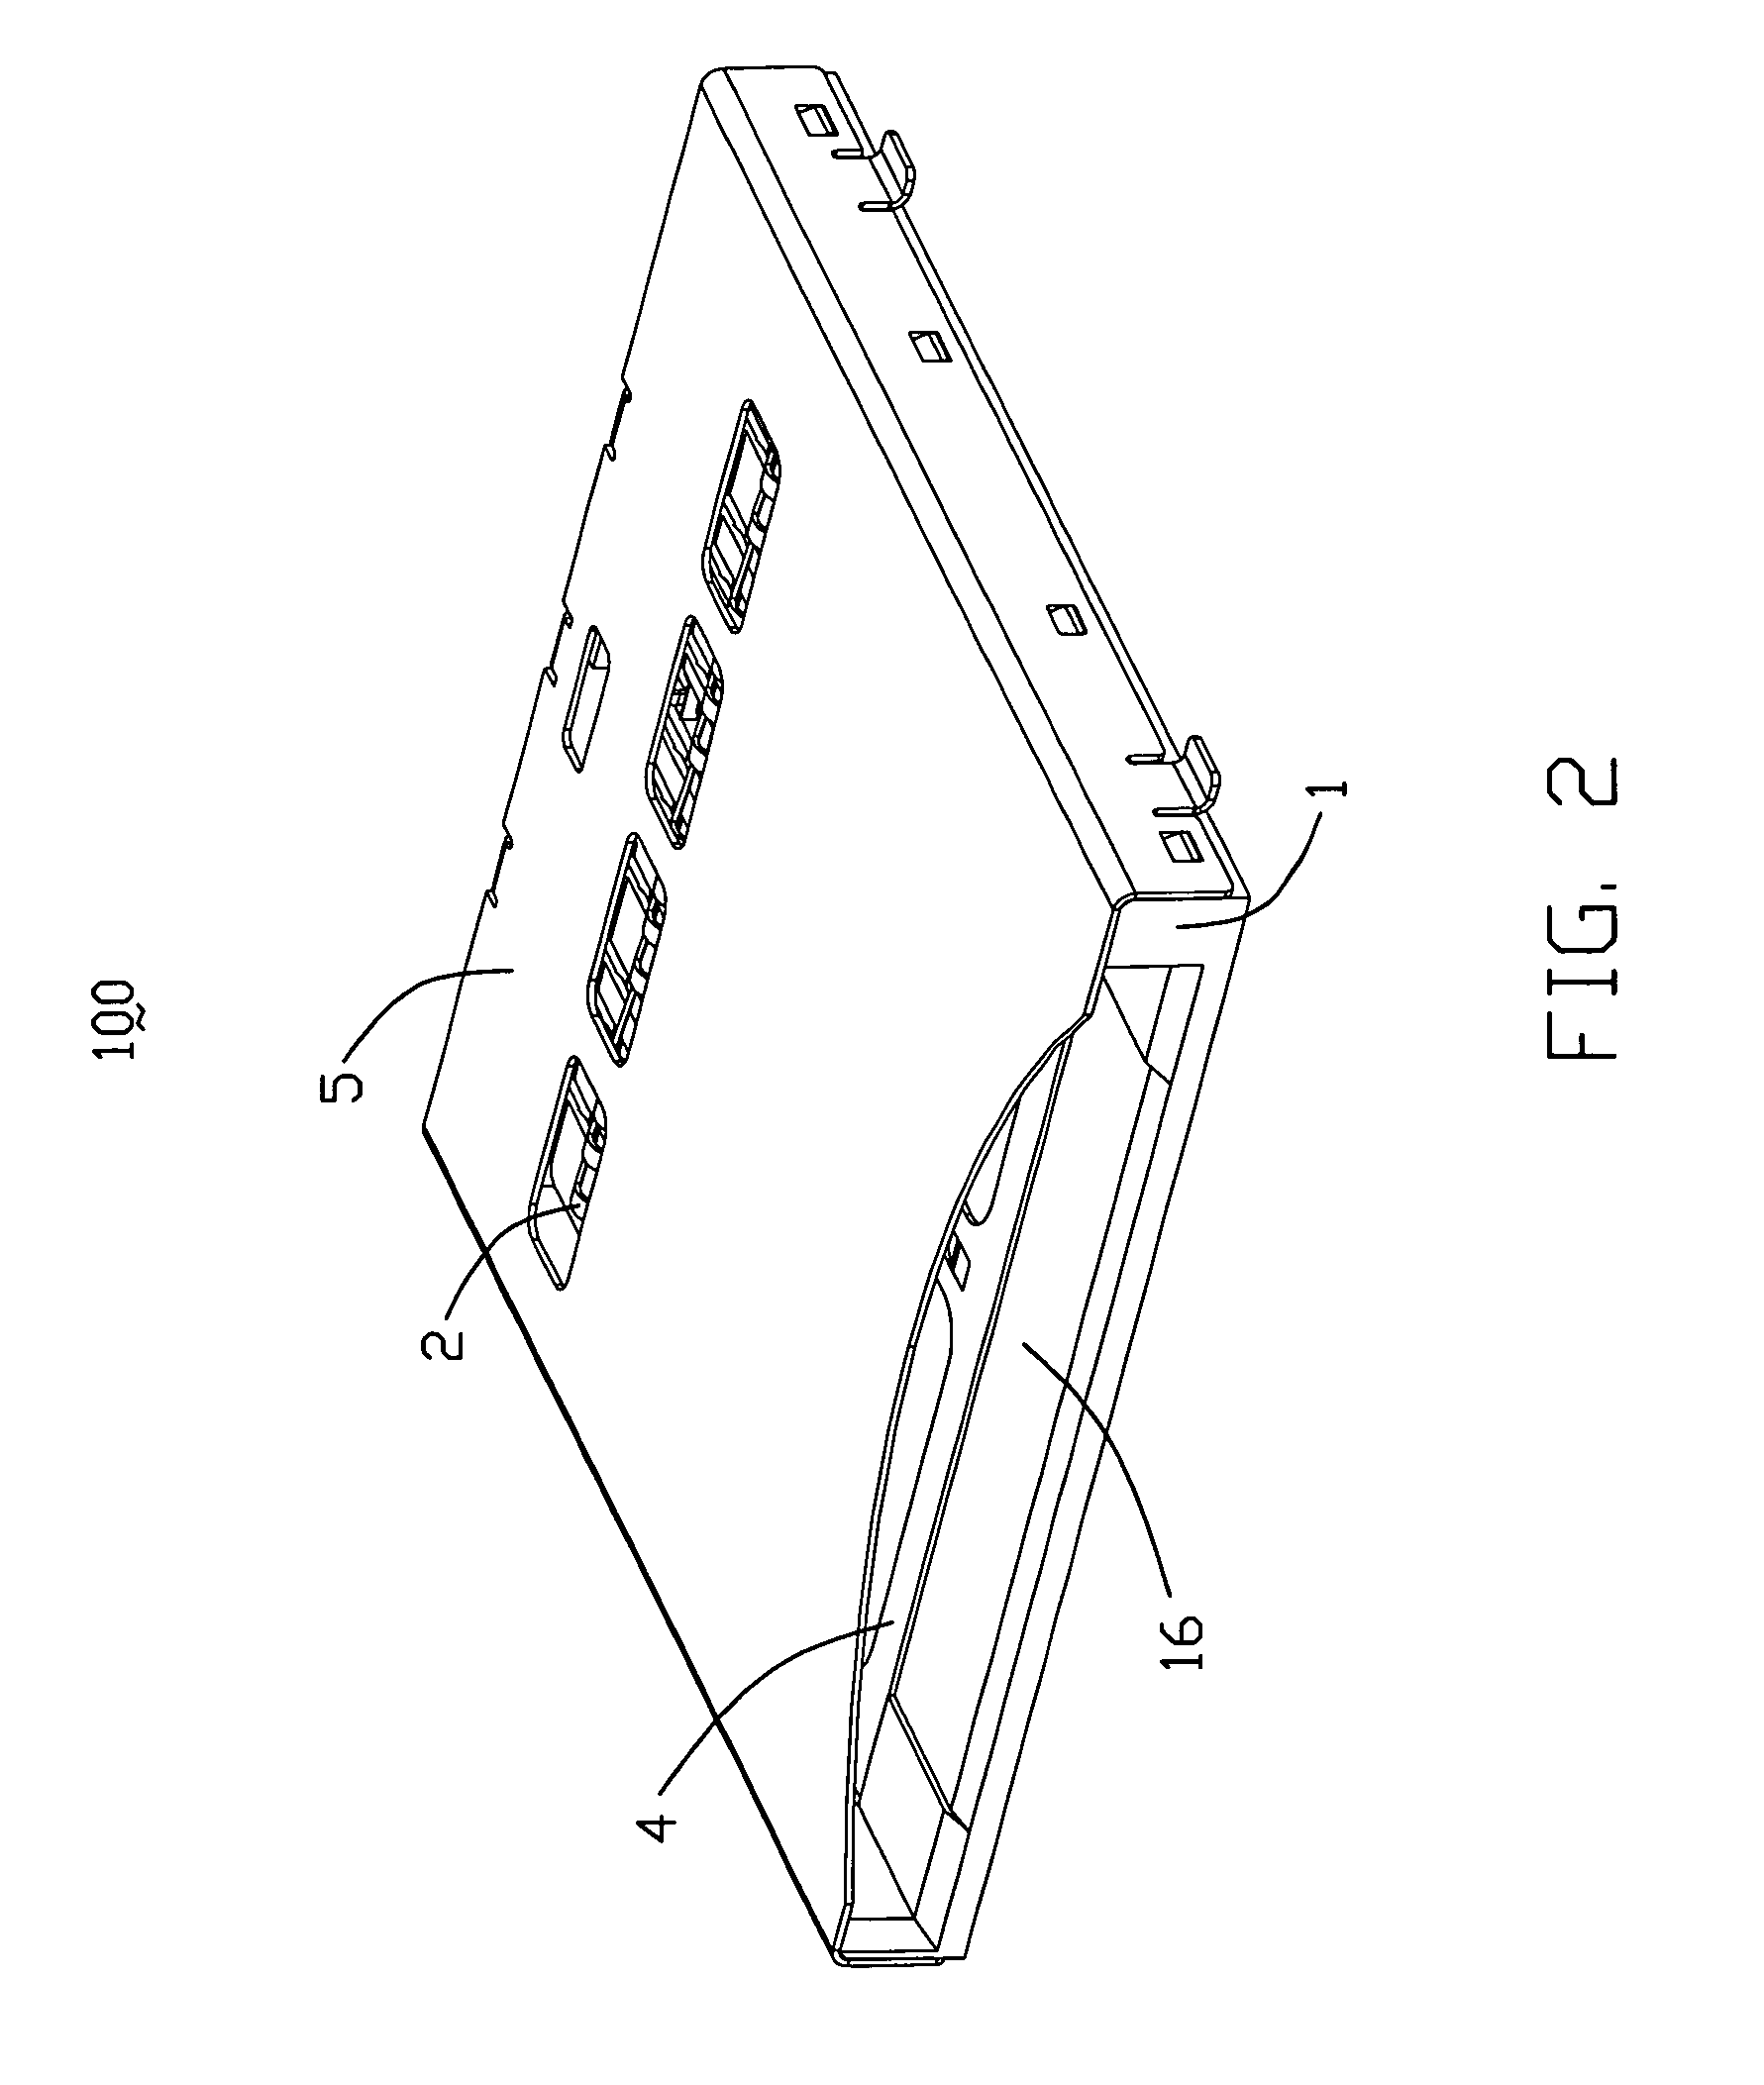 Memory card connector with improved switch contacts for stably detection of card insertion or removal